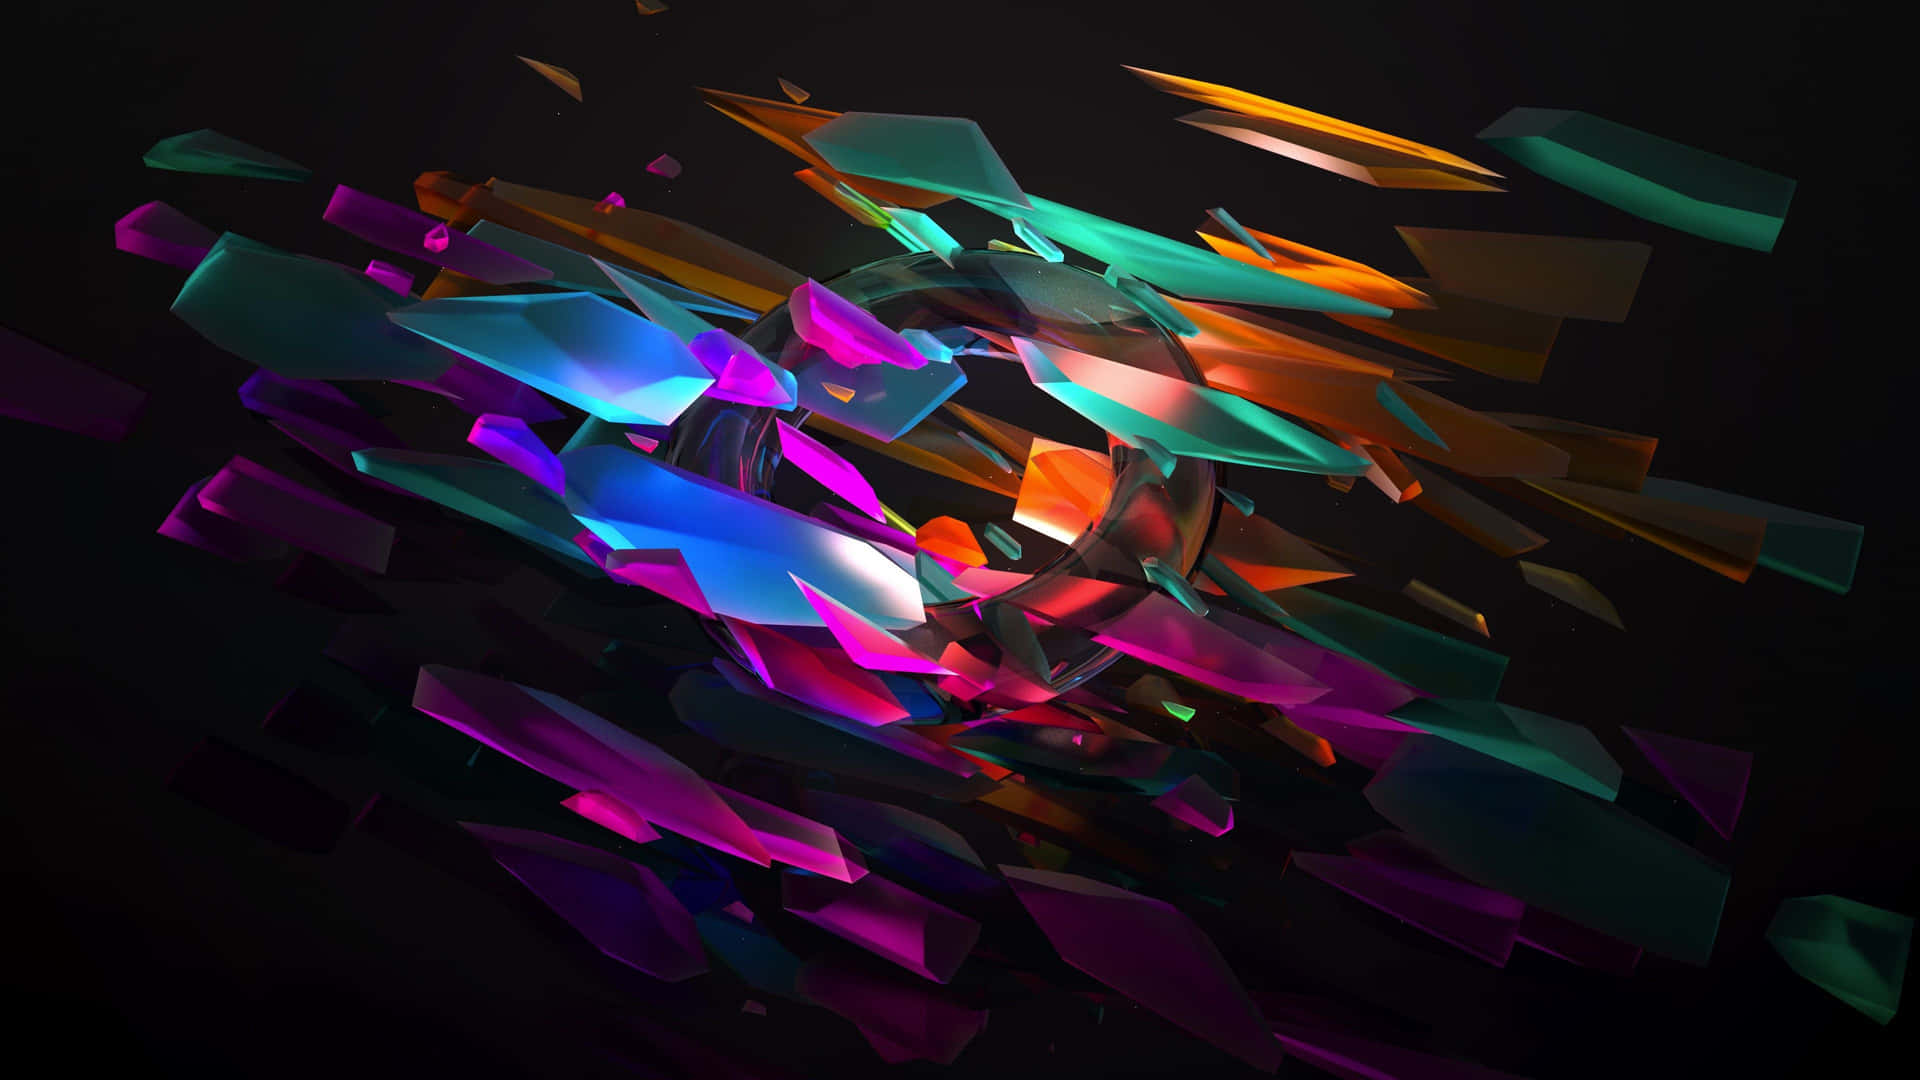 100+] Abstract Gaming Background s 